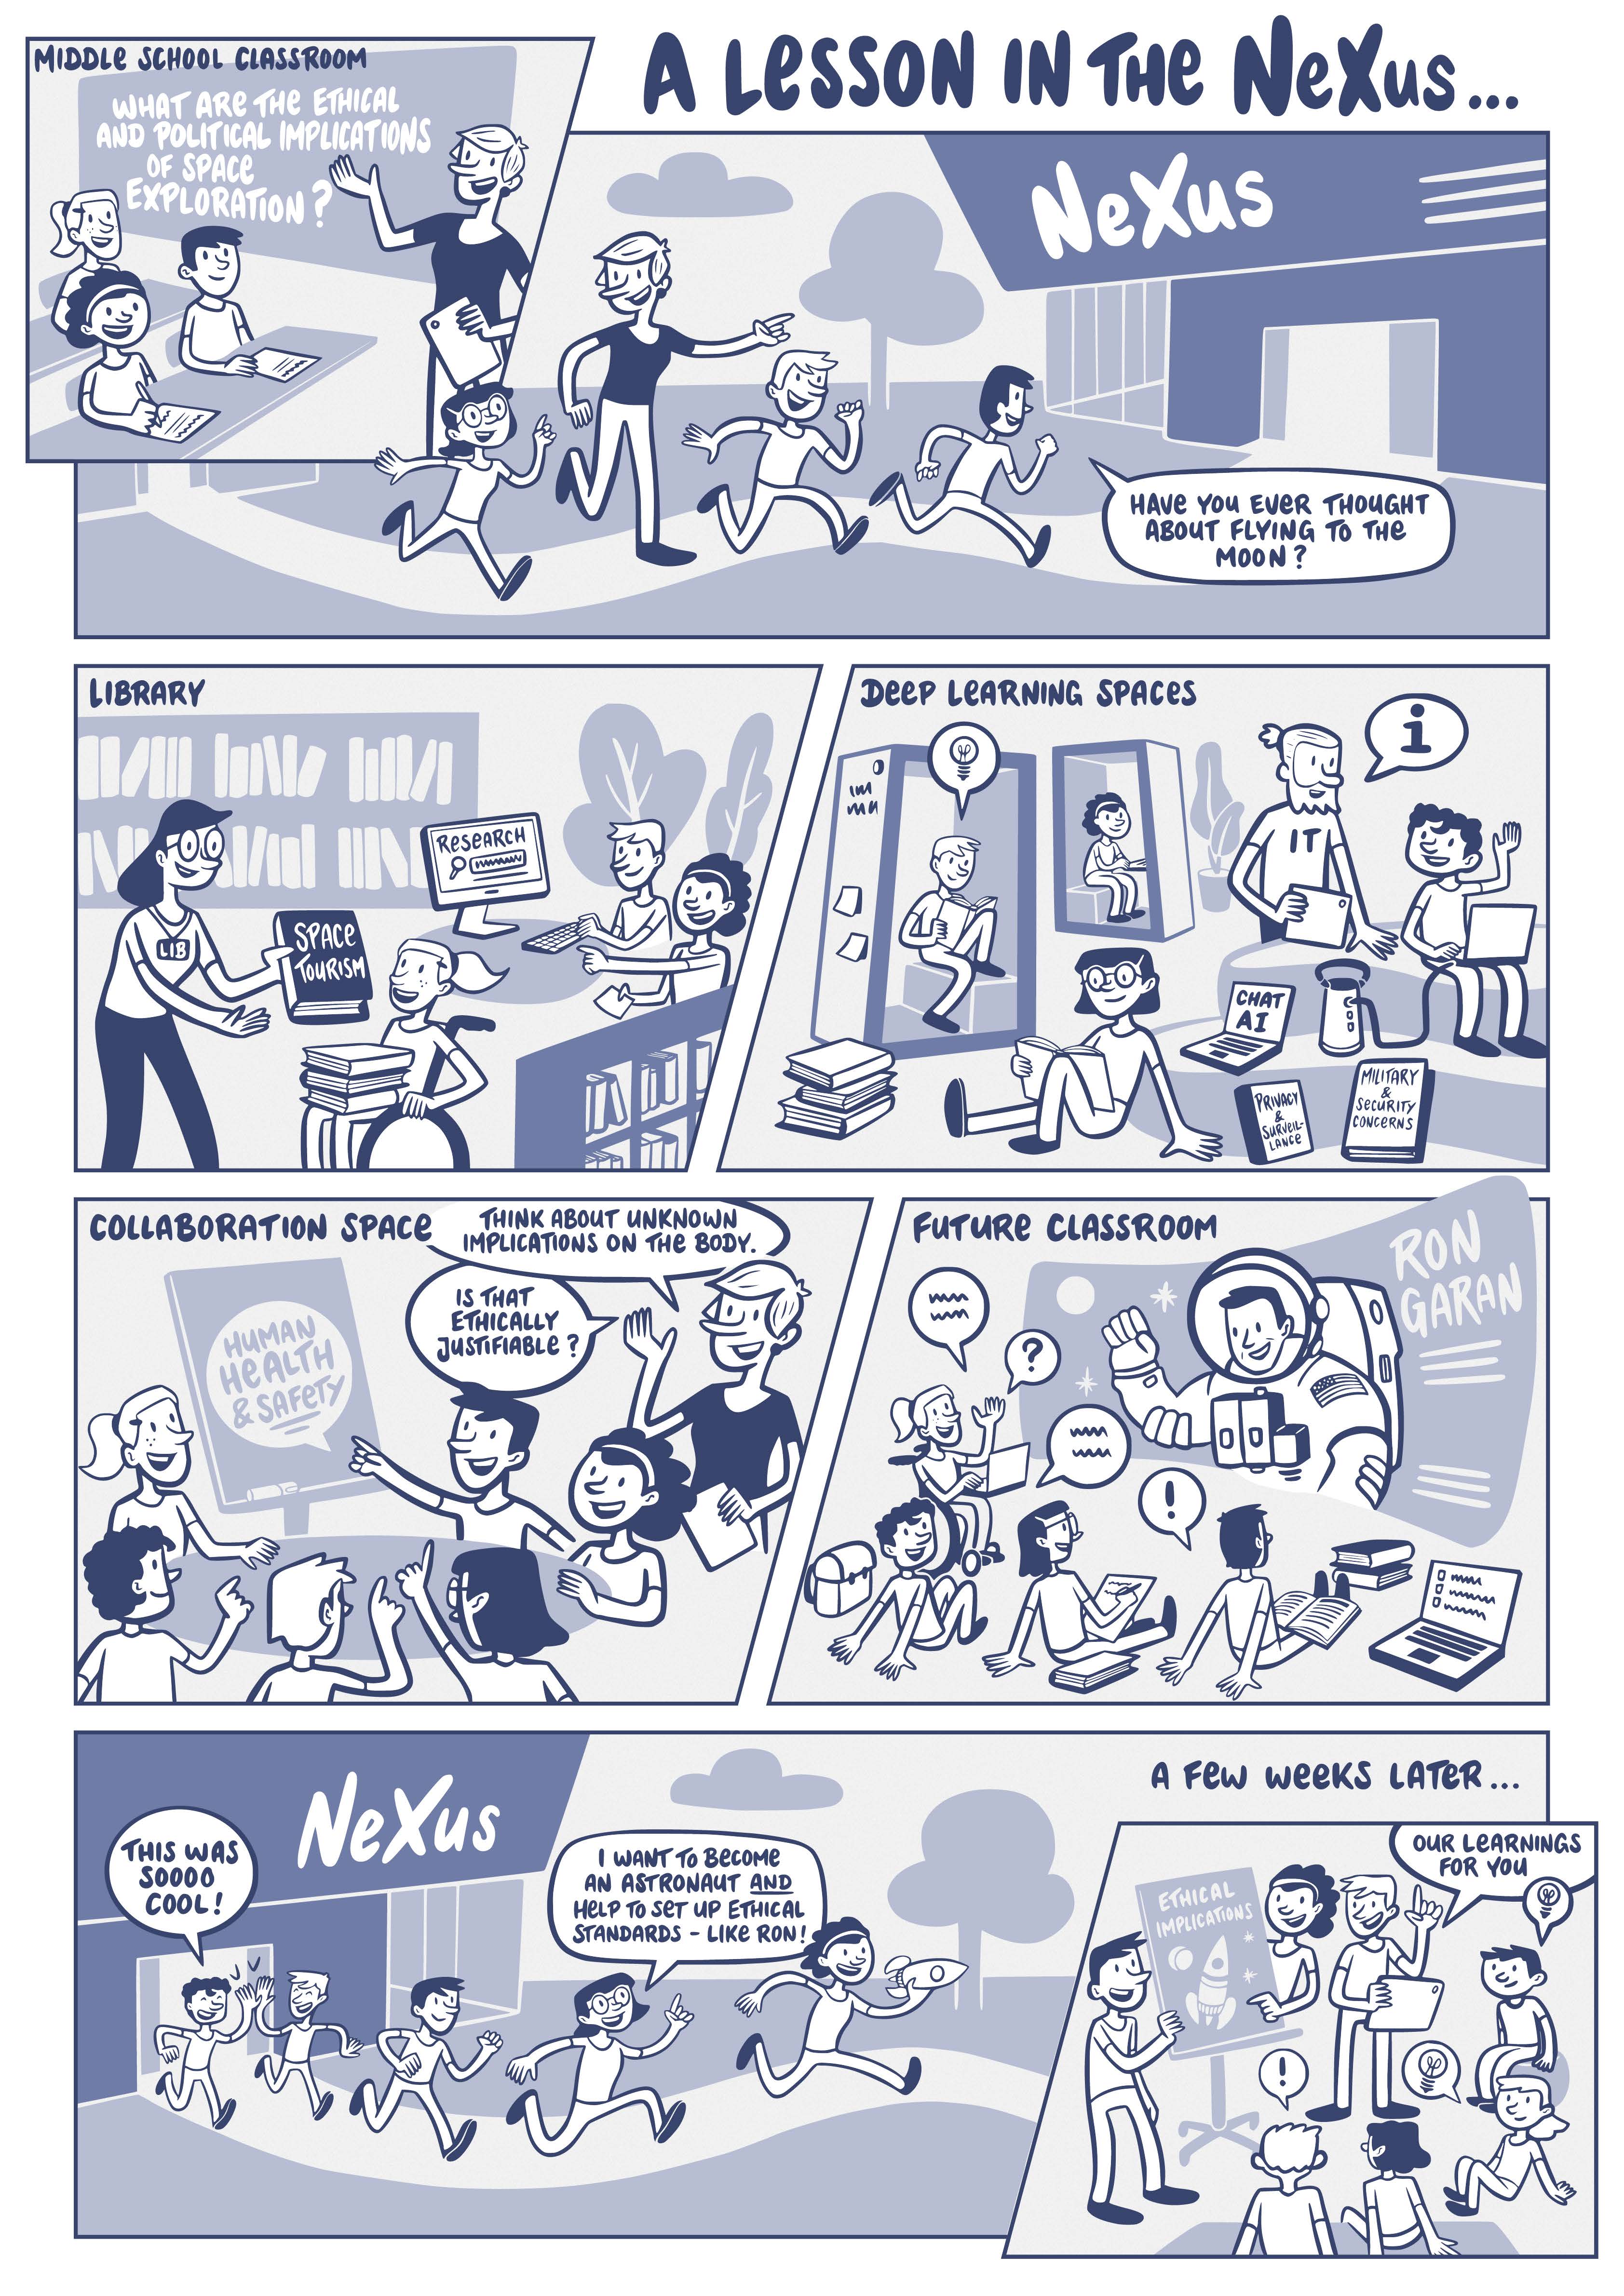 This is a comic strip depicting what a typical unit could look like in the Learning NeXus